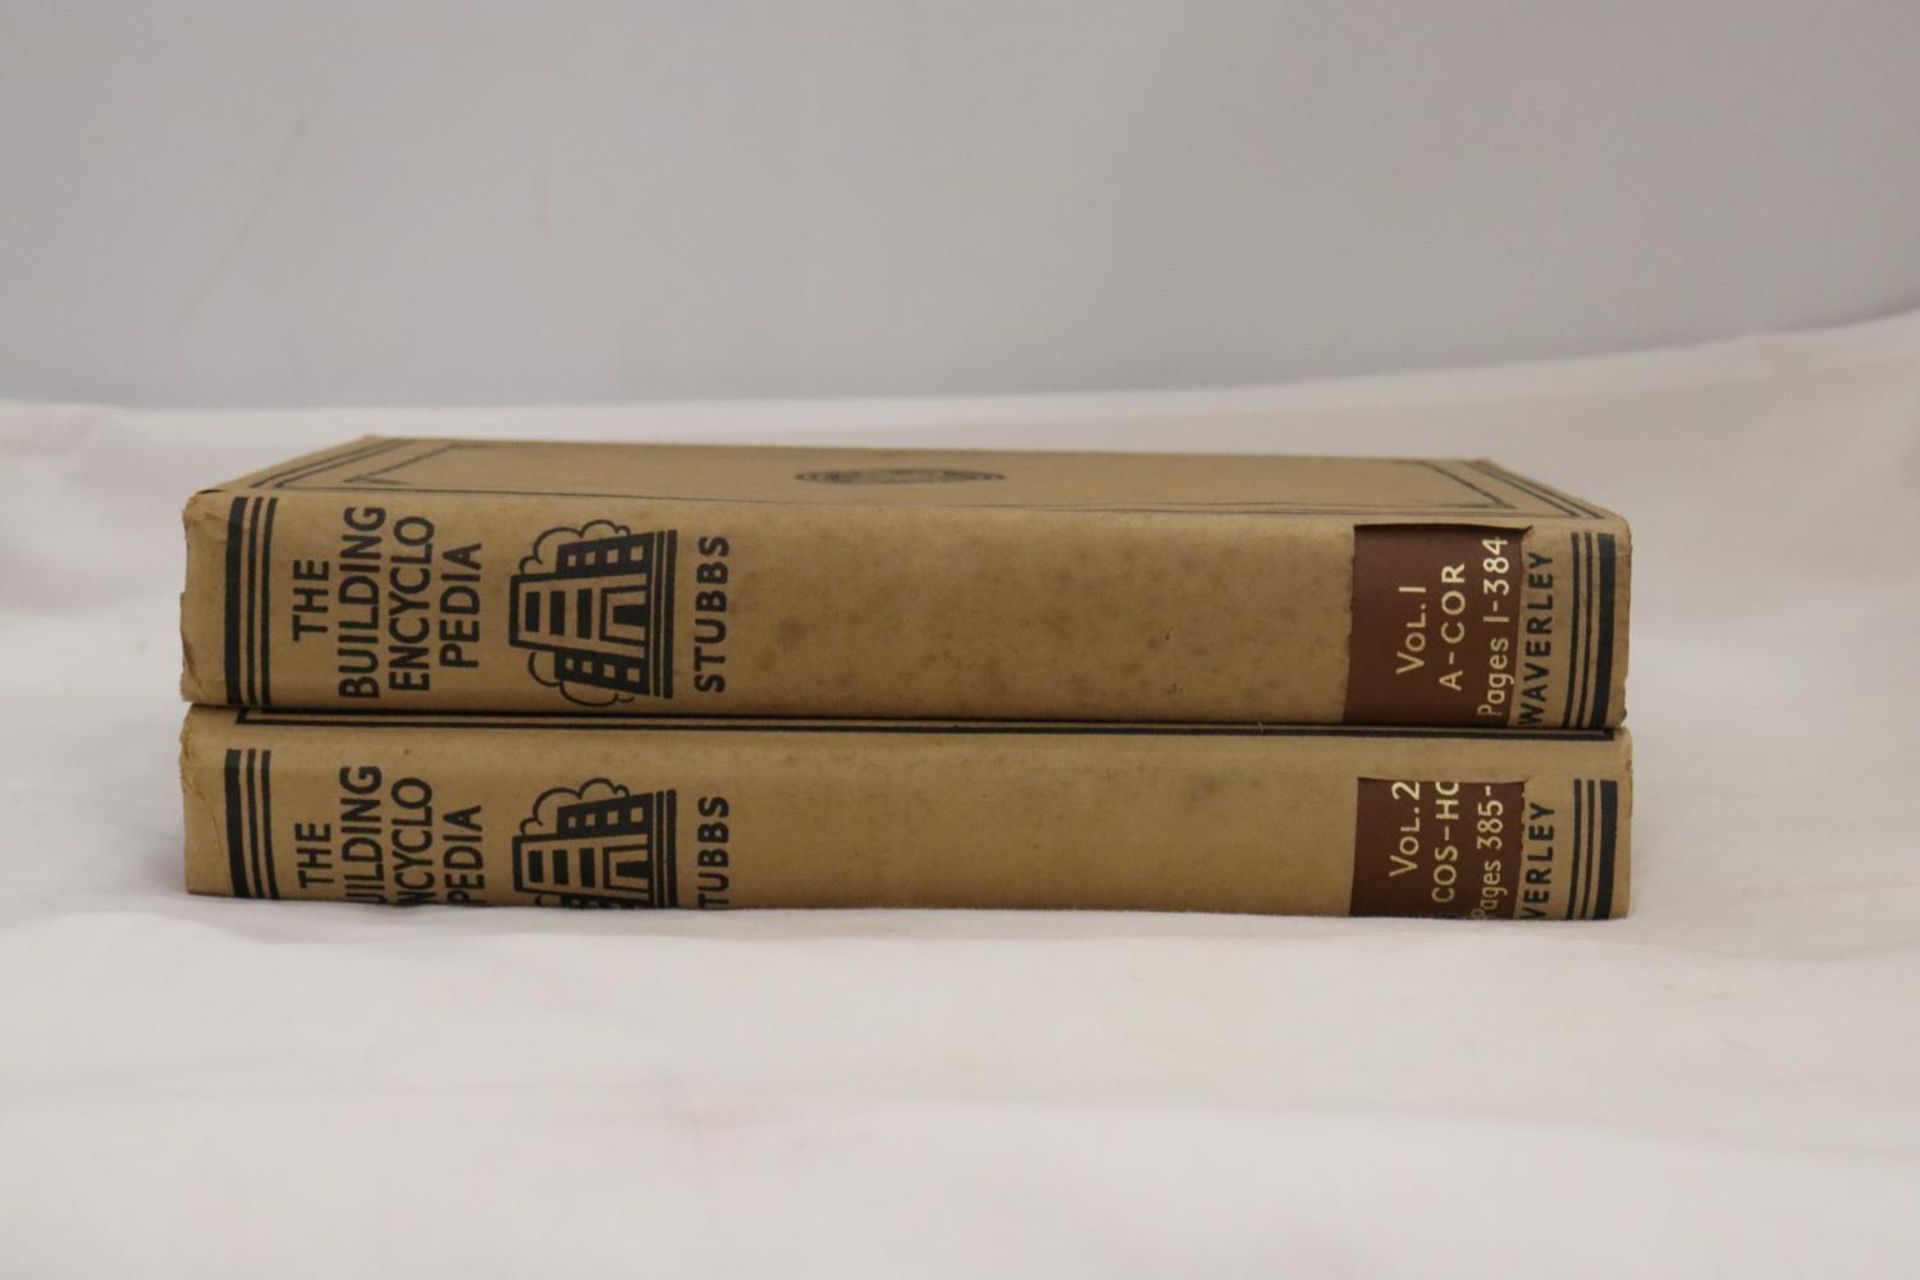 A COMPLETE 4 VOLUME SET OF 1930'S 'THE BUILDING ENCYCLOPEDIA' WITH DUST JACKETS IN ORIGINAL BOX - Bild 4 aus 5